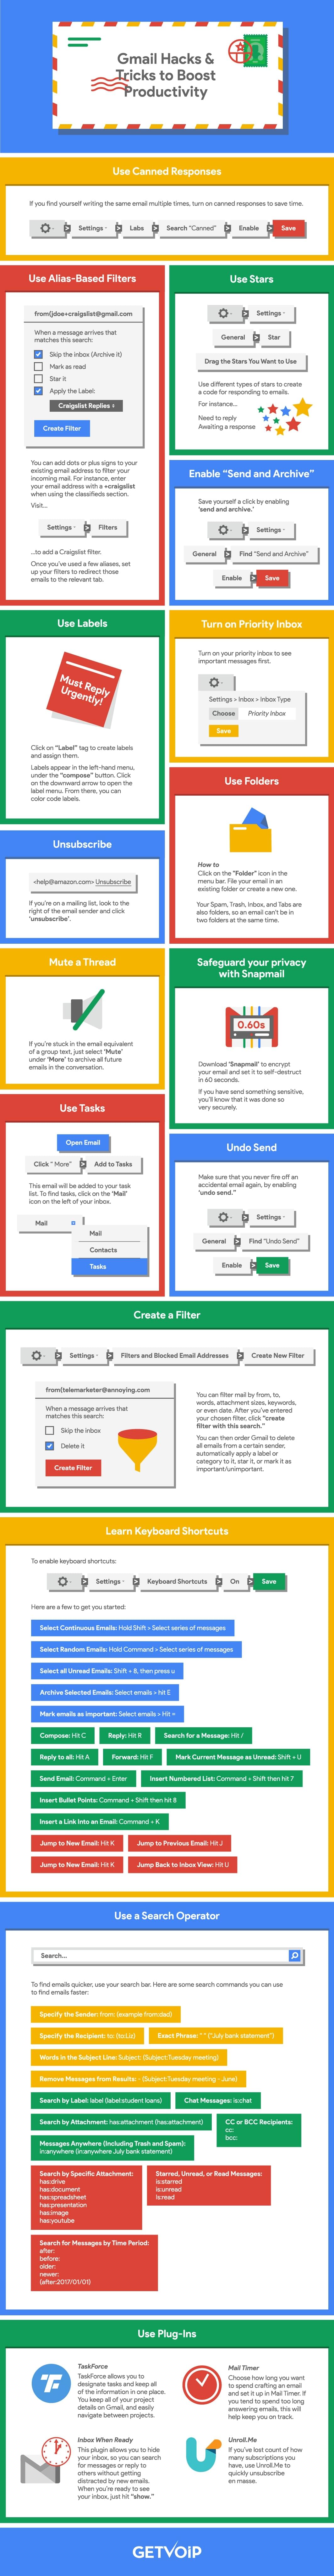 Gmail Tips and Tricks Infographic